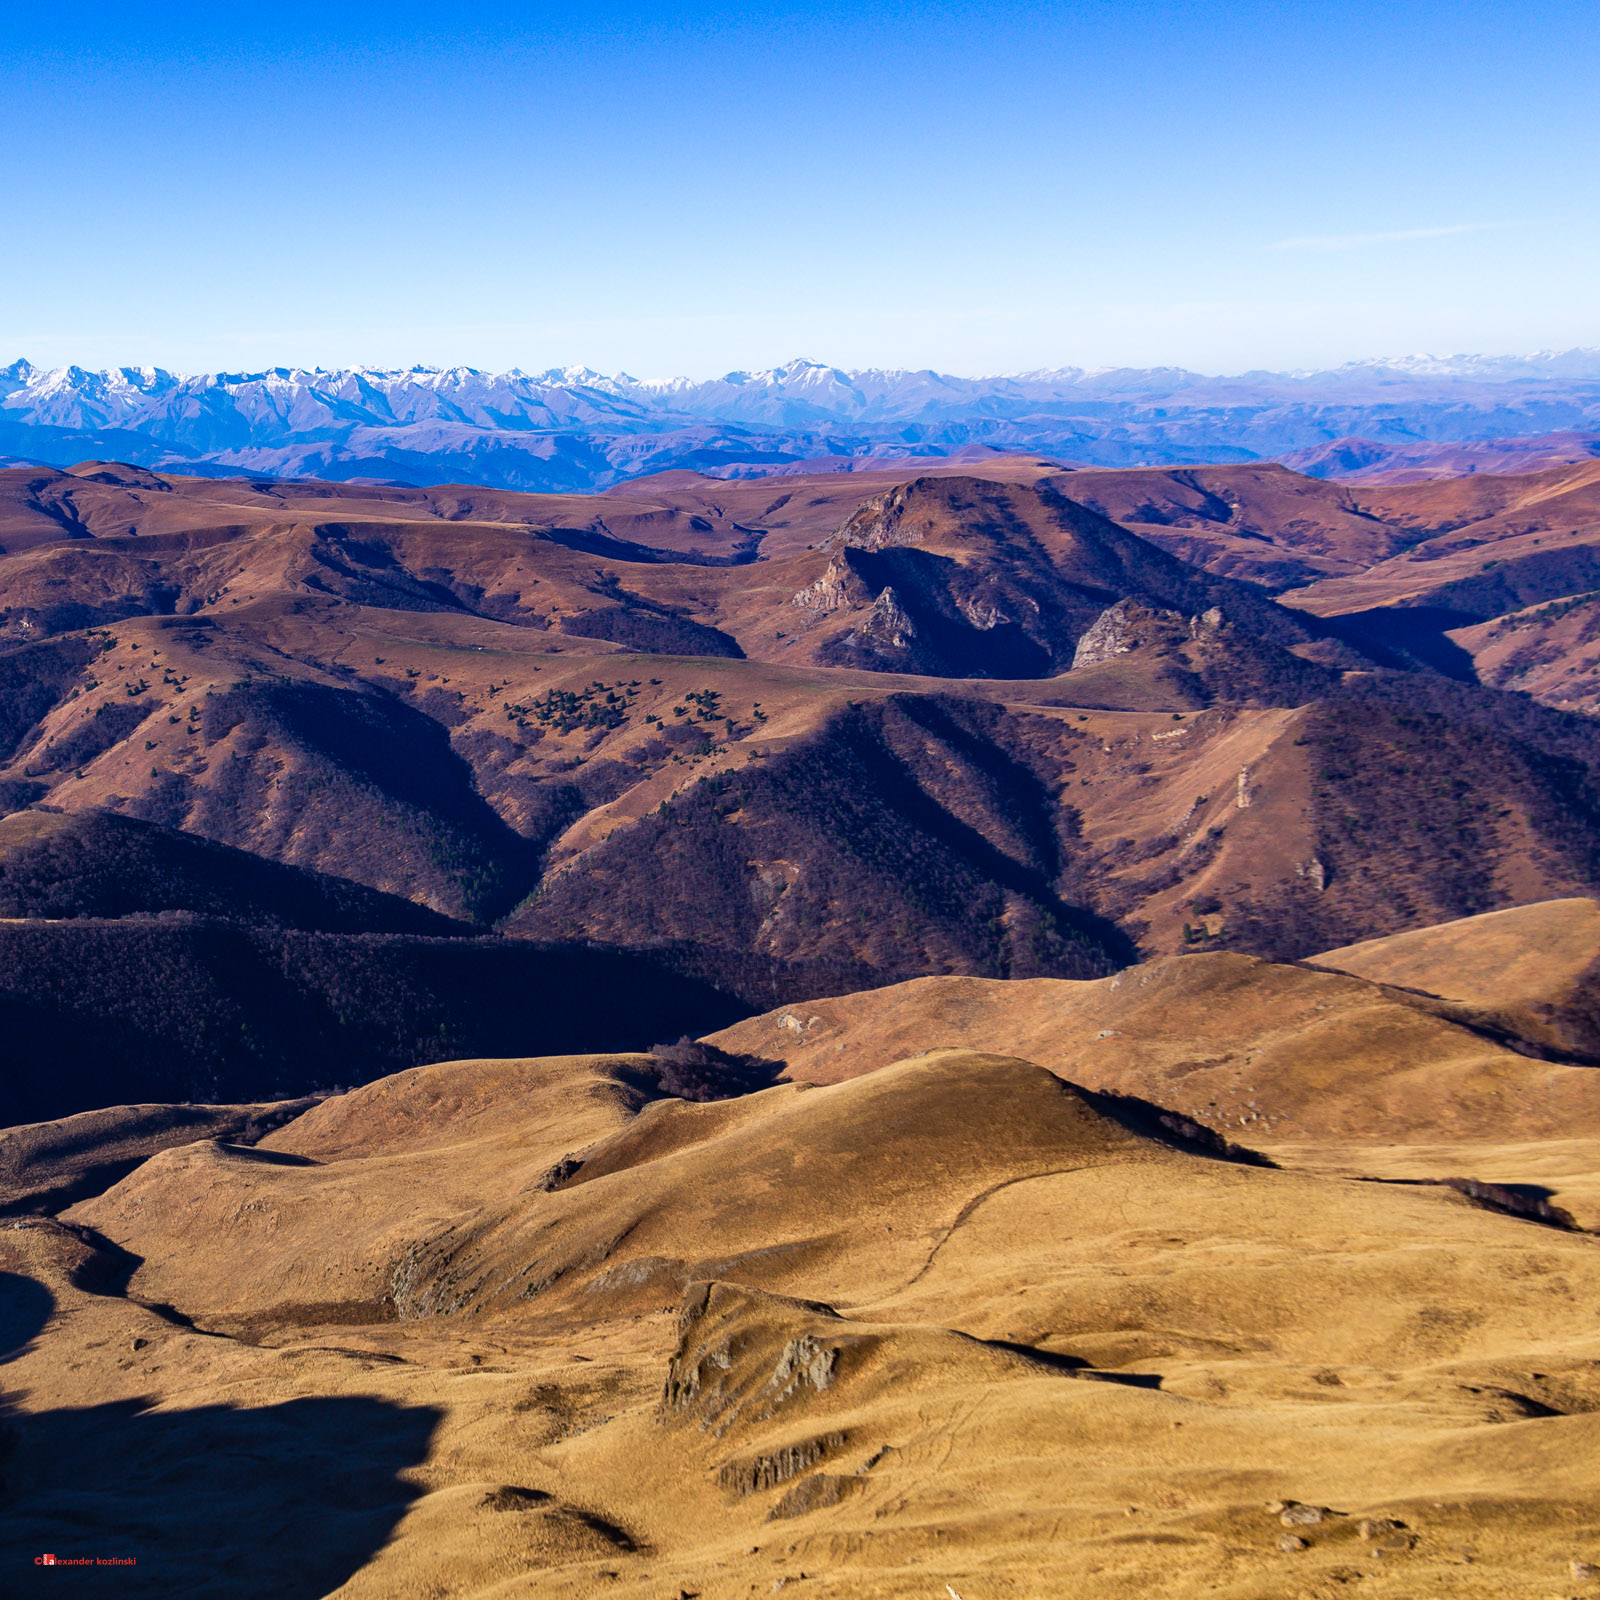 View of the Caucasus Range from the Bermamyt Plateau